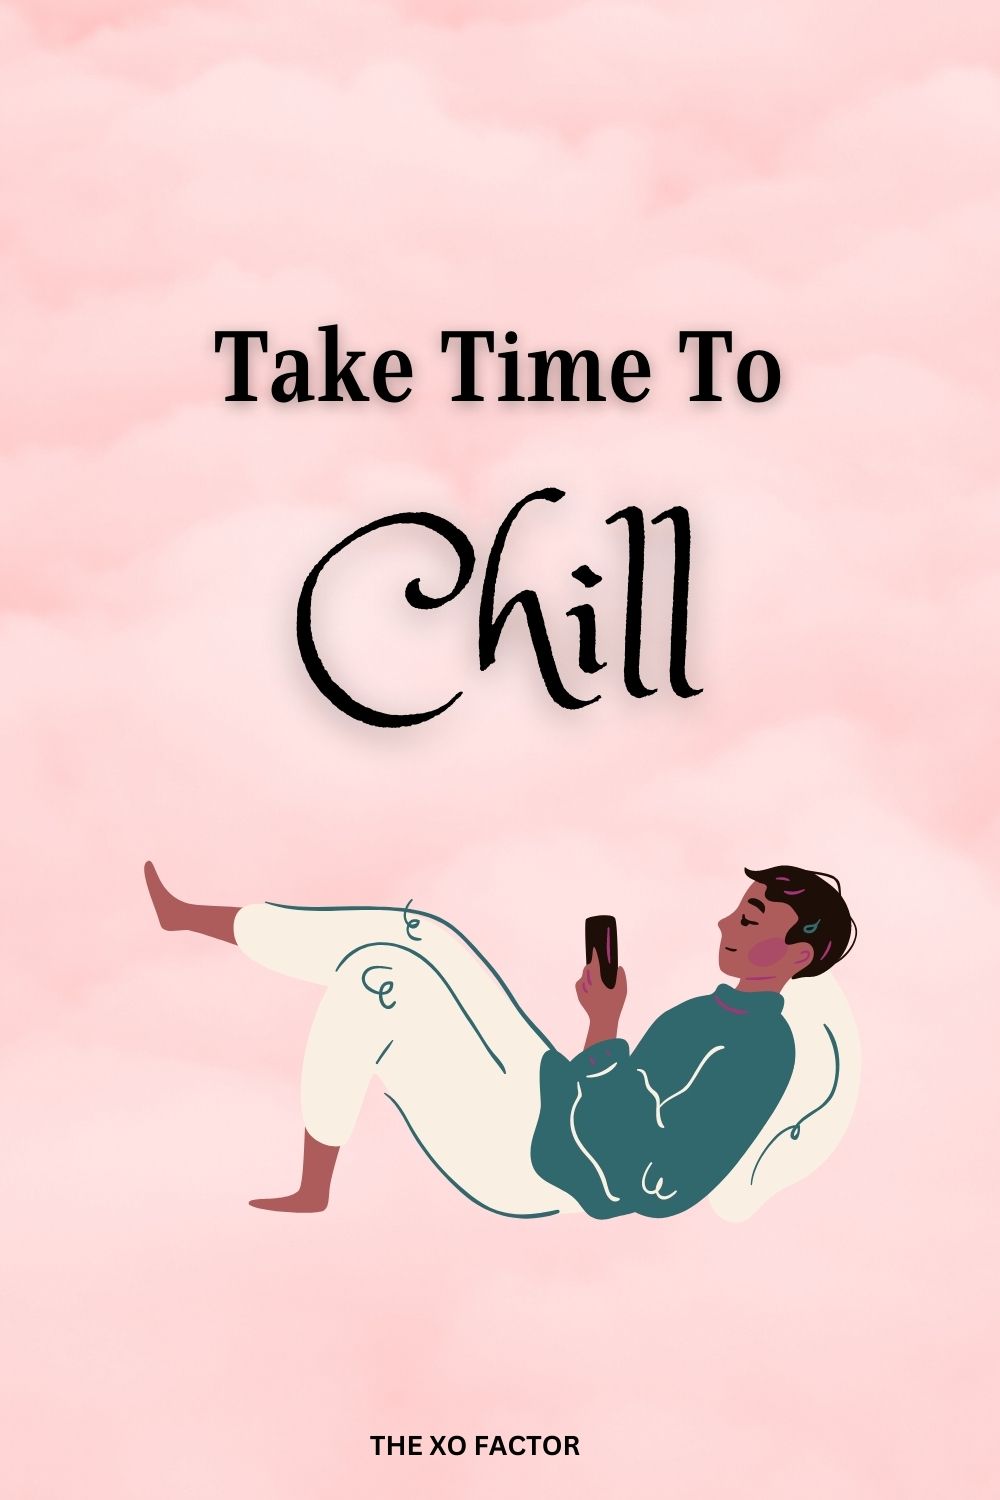 Take time to chill.